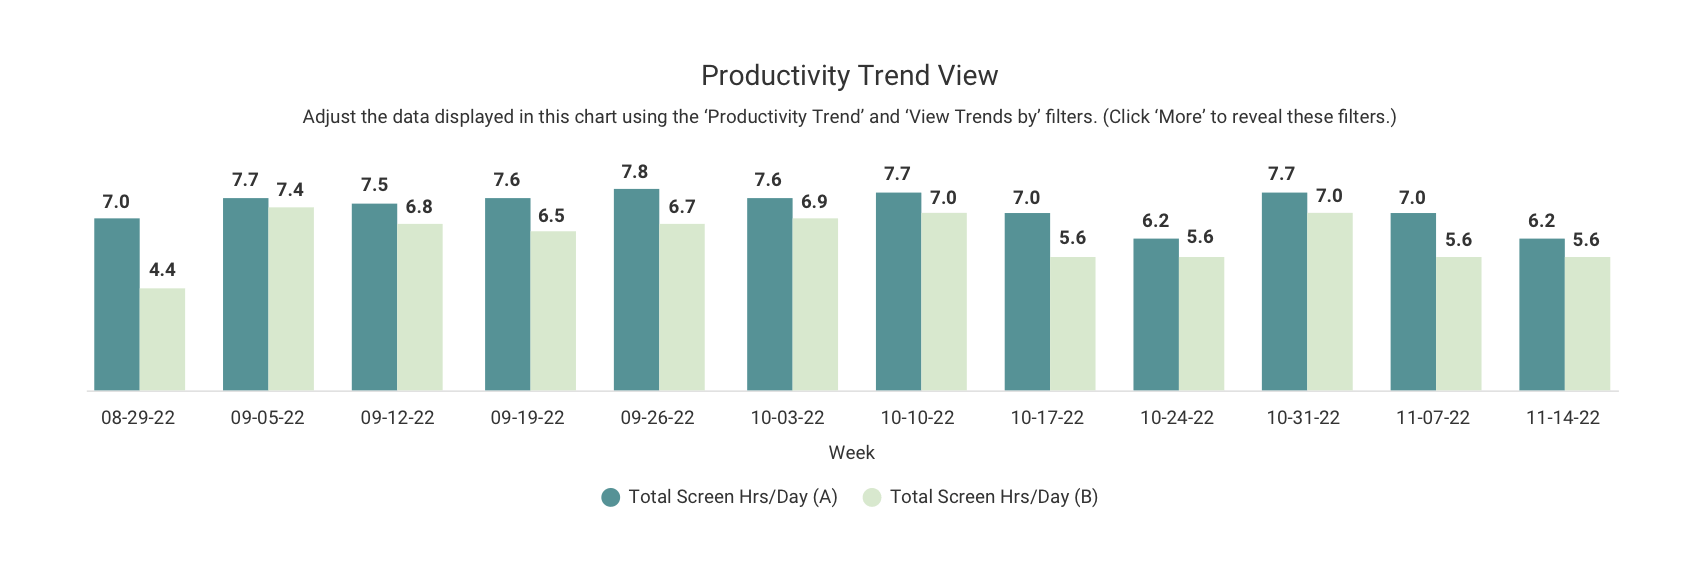 Productivity trends to understand how productivity varies across different working groups and varying work locations.
